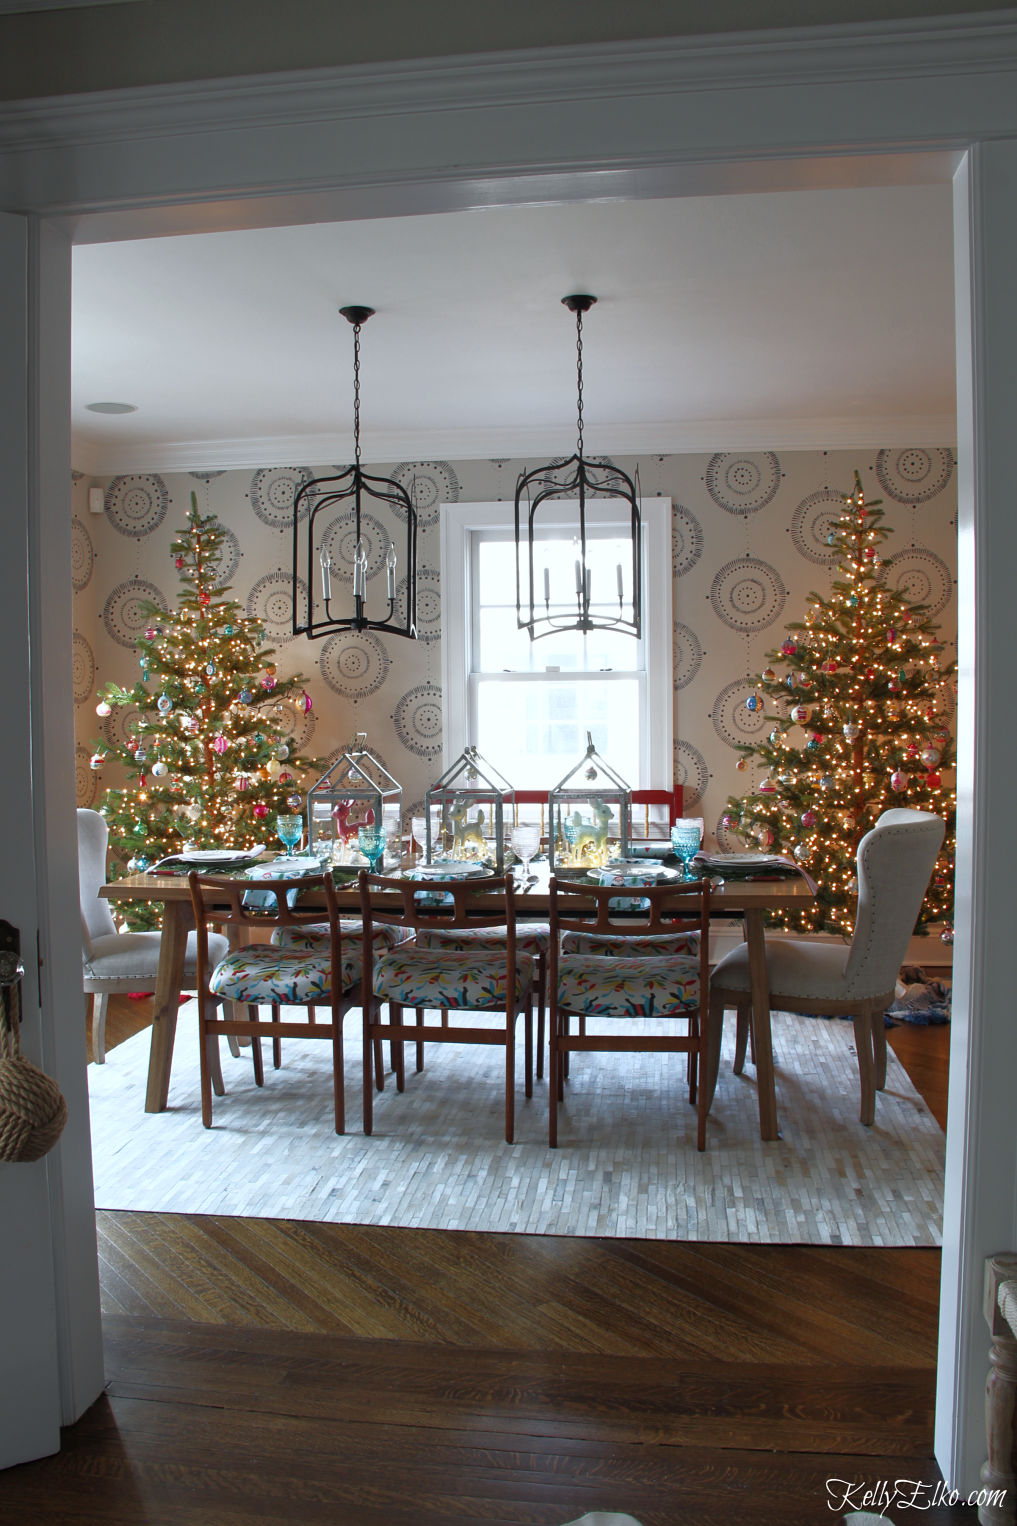 Love this Shiny Brite Christmas dining room - she mixes old and new ornaments for a retro look kellyelko.com #christmas #christmasdecor #christmastrees #christmasdecorations #vintagechristmas #retrochristmas #shinybrites #christmasornaments